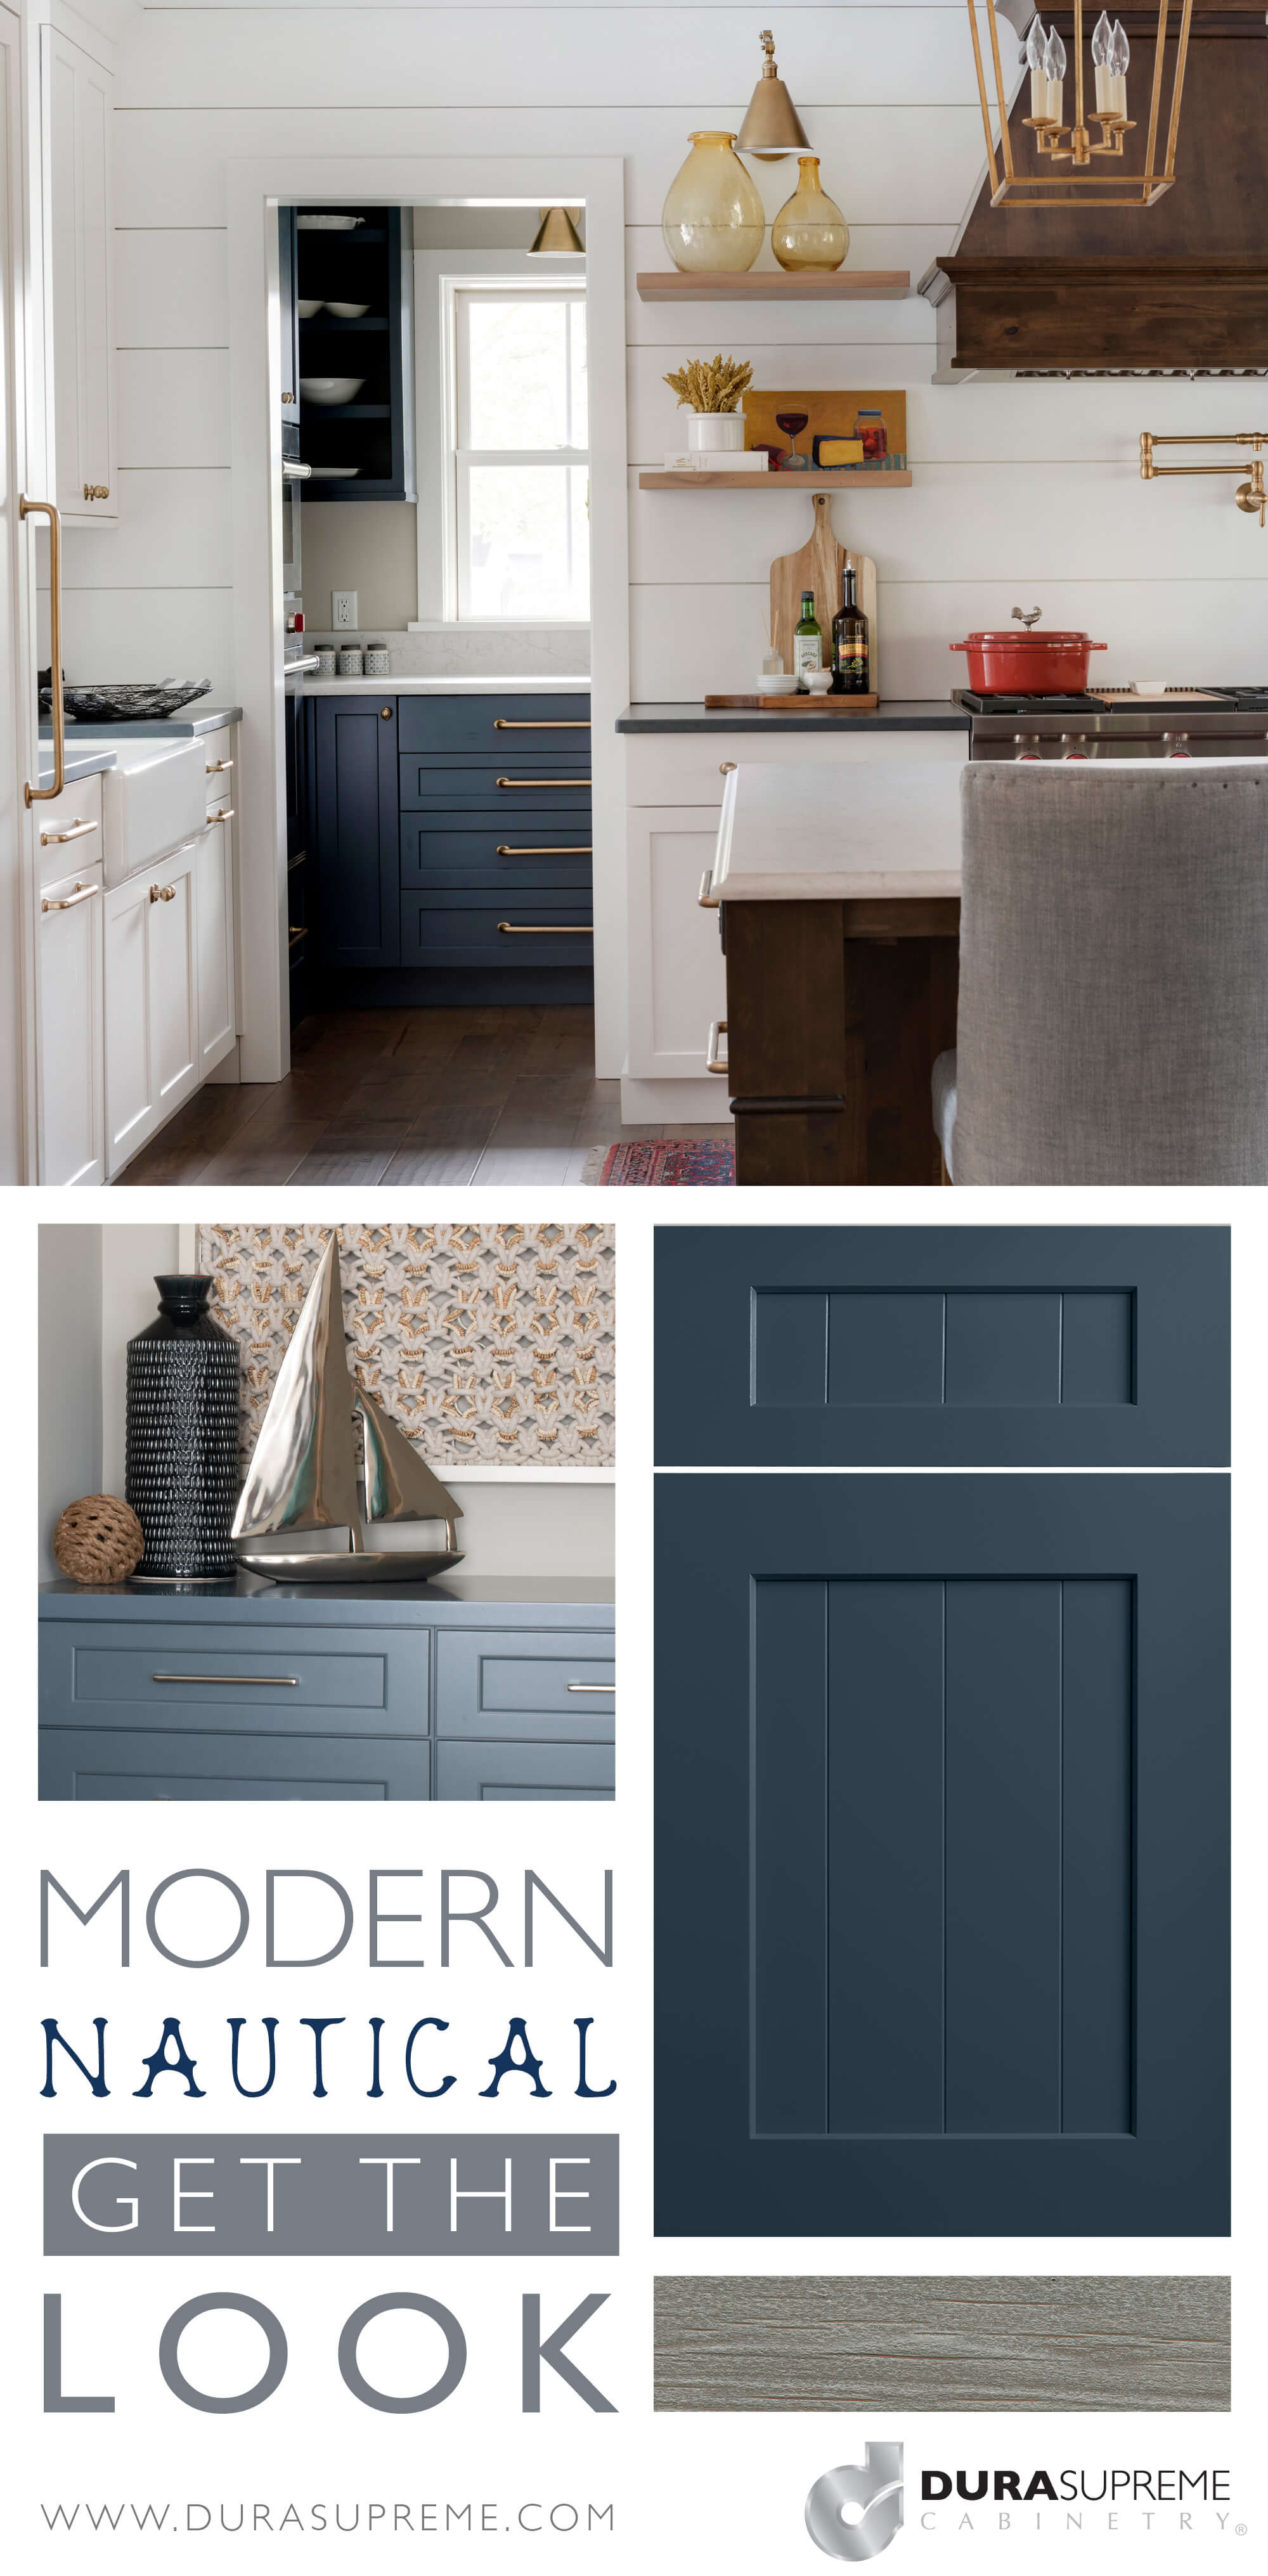 Get the Look of Modern Nautical Style for a Kitchen, Bathroom, or Interior Design.